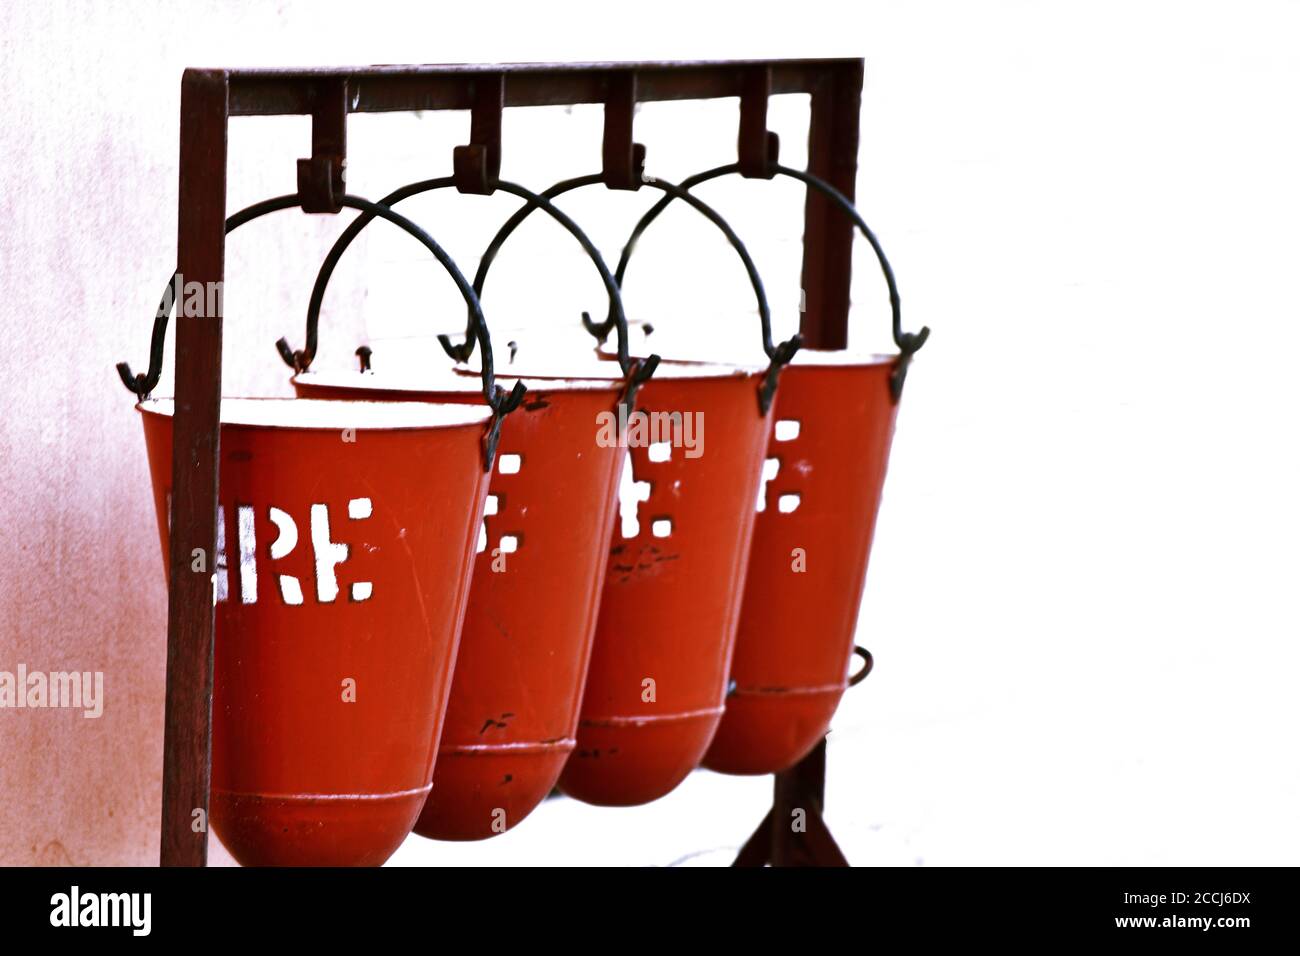 Fire Safety Sand Bucket hanging against white background Stock Photo